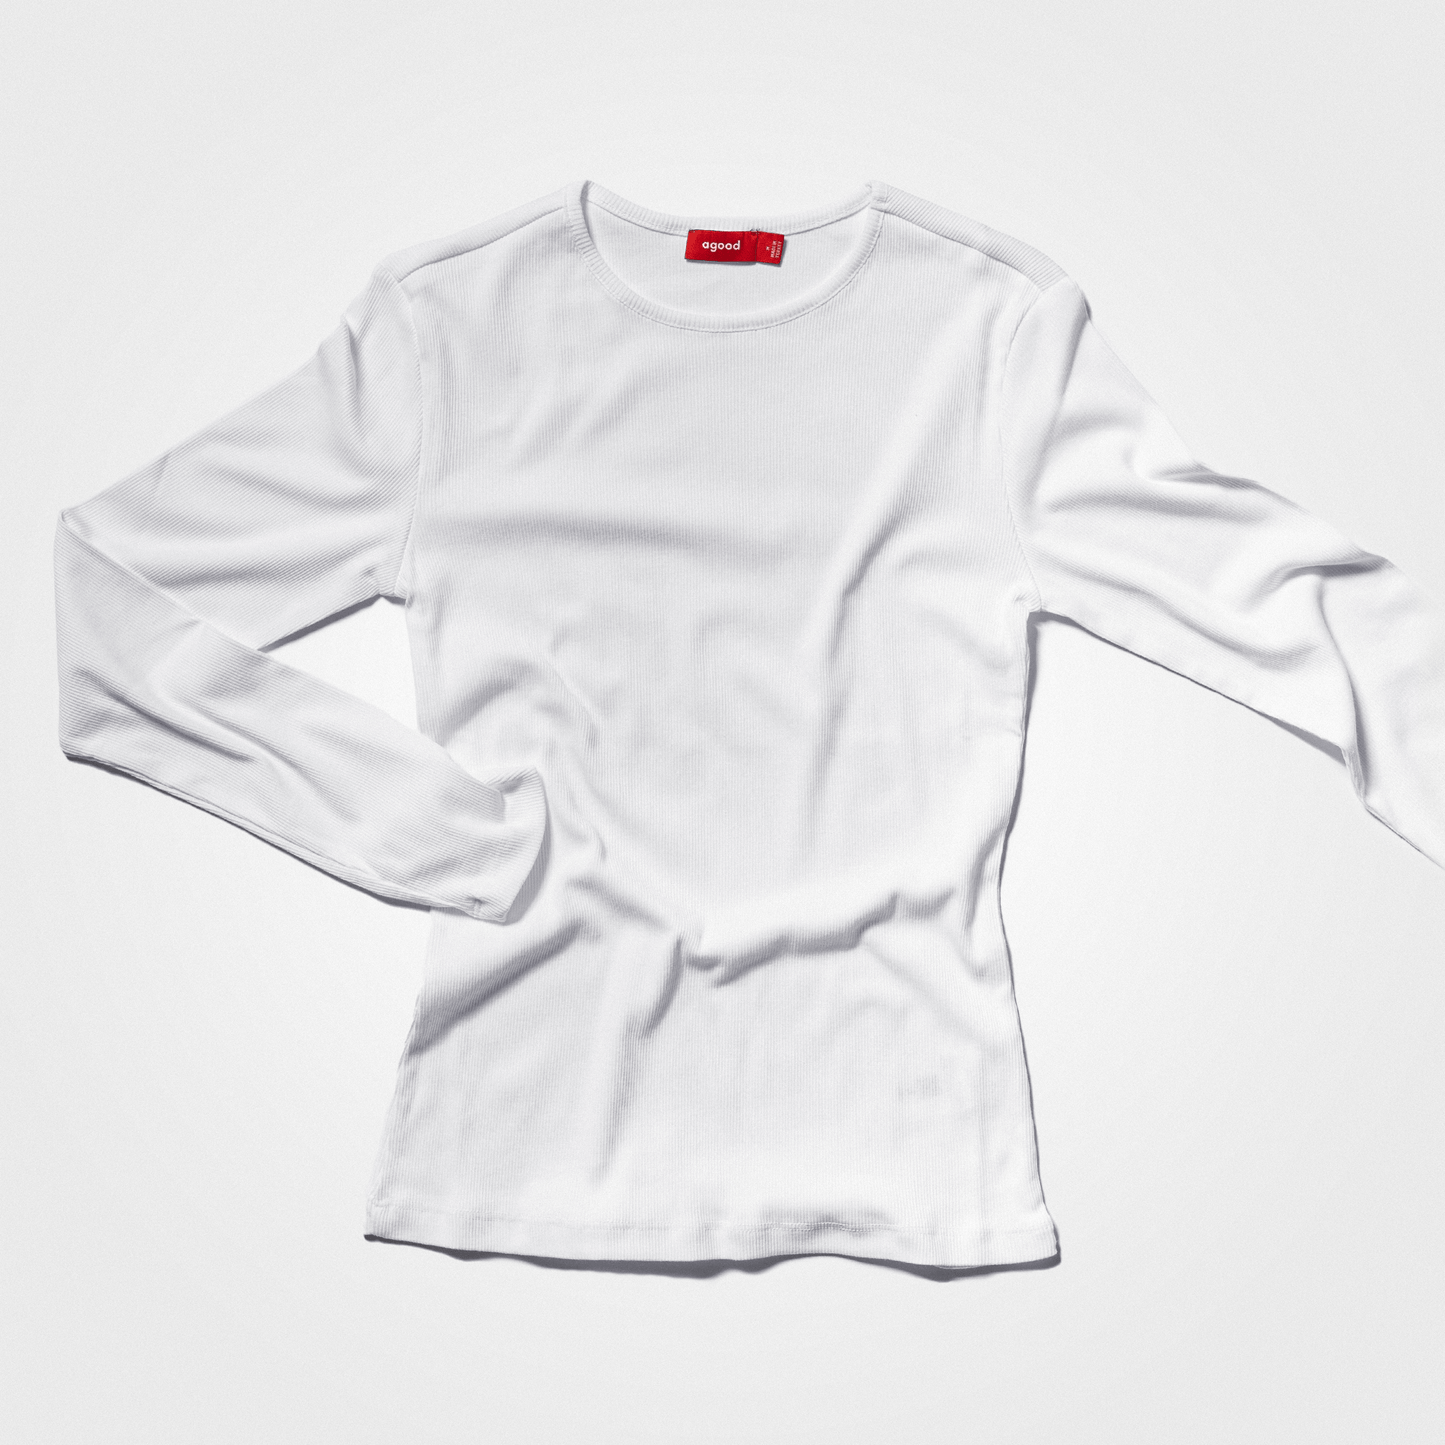 5 Pack | Women’s Rib Long Sleeve Tops, Recycled Cotton, White